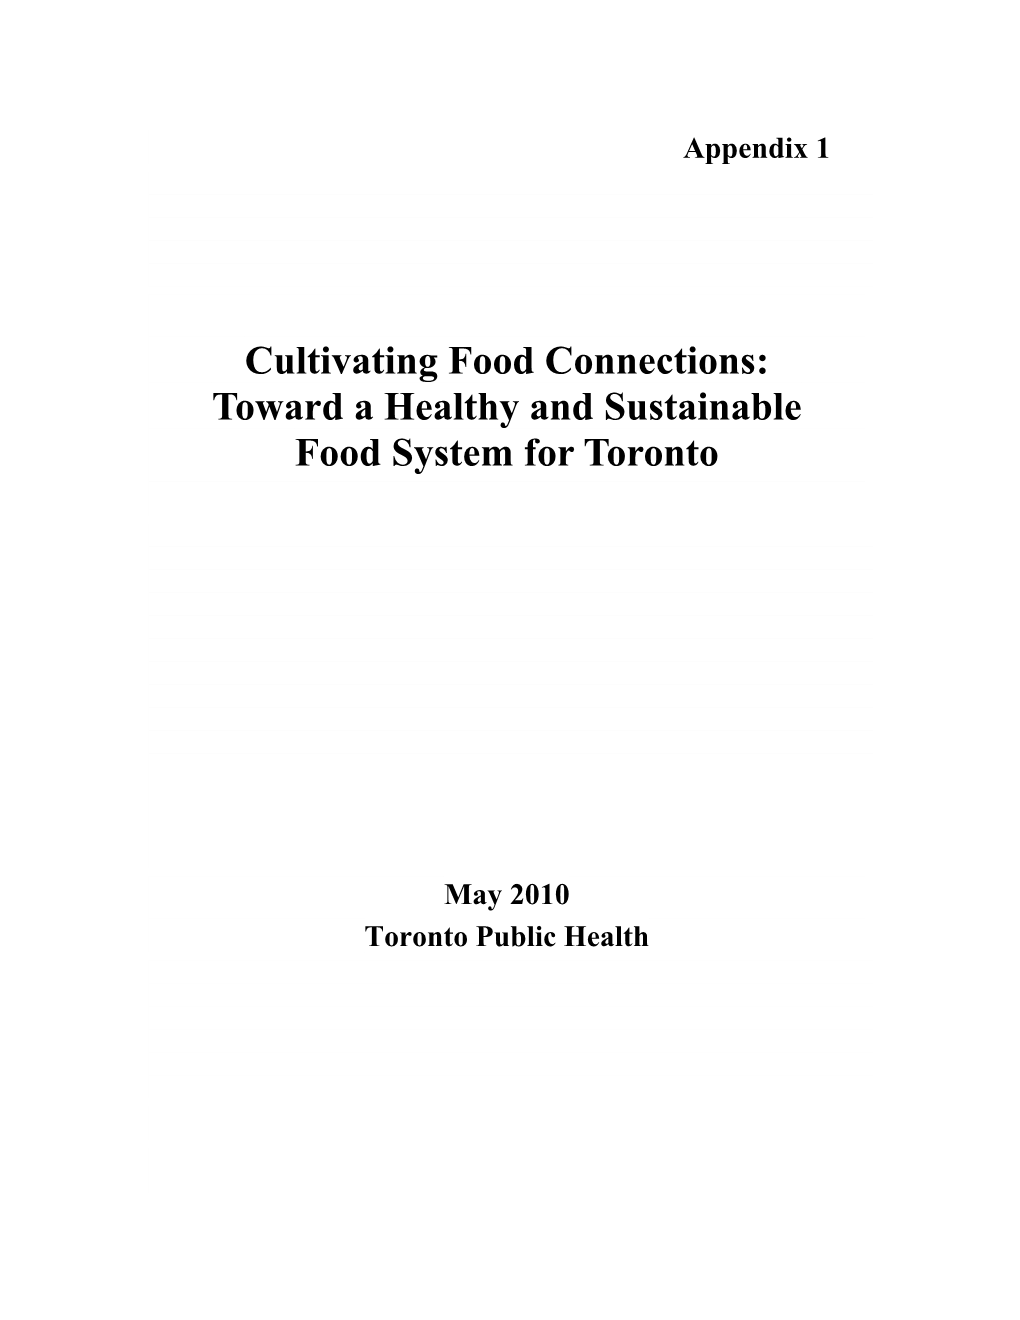 Toward a Healthy and Sustainable Food System for Toronto